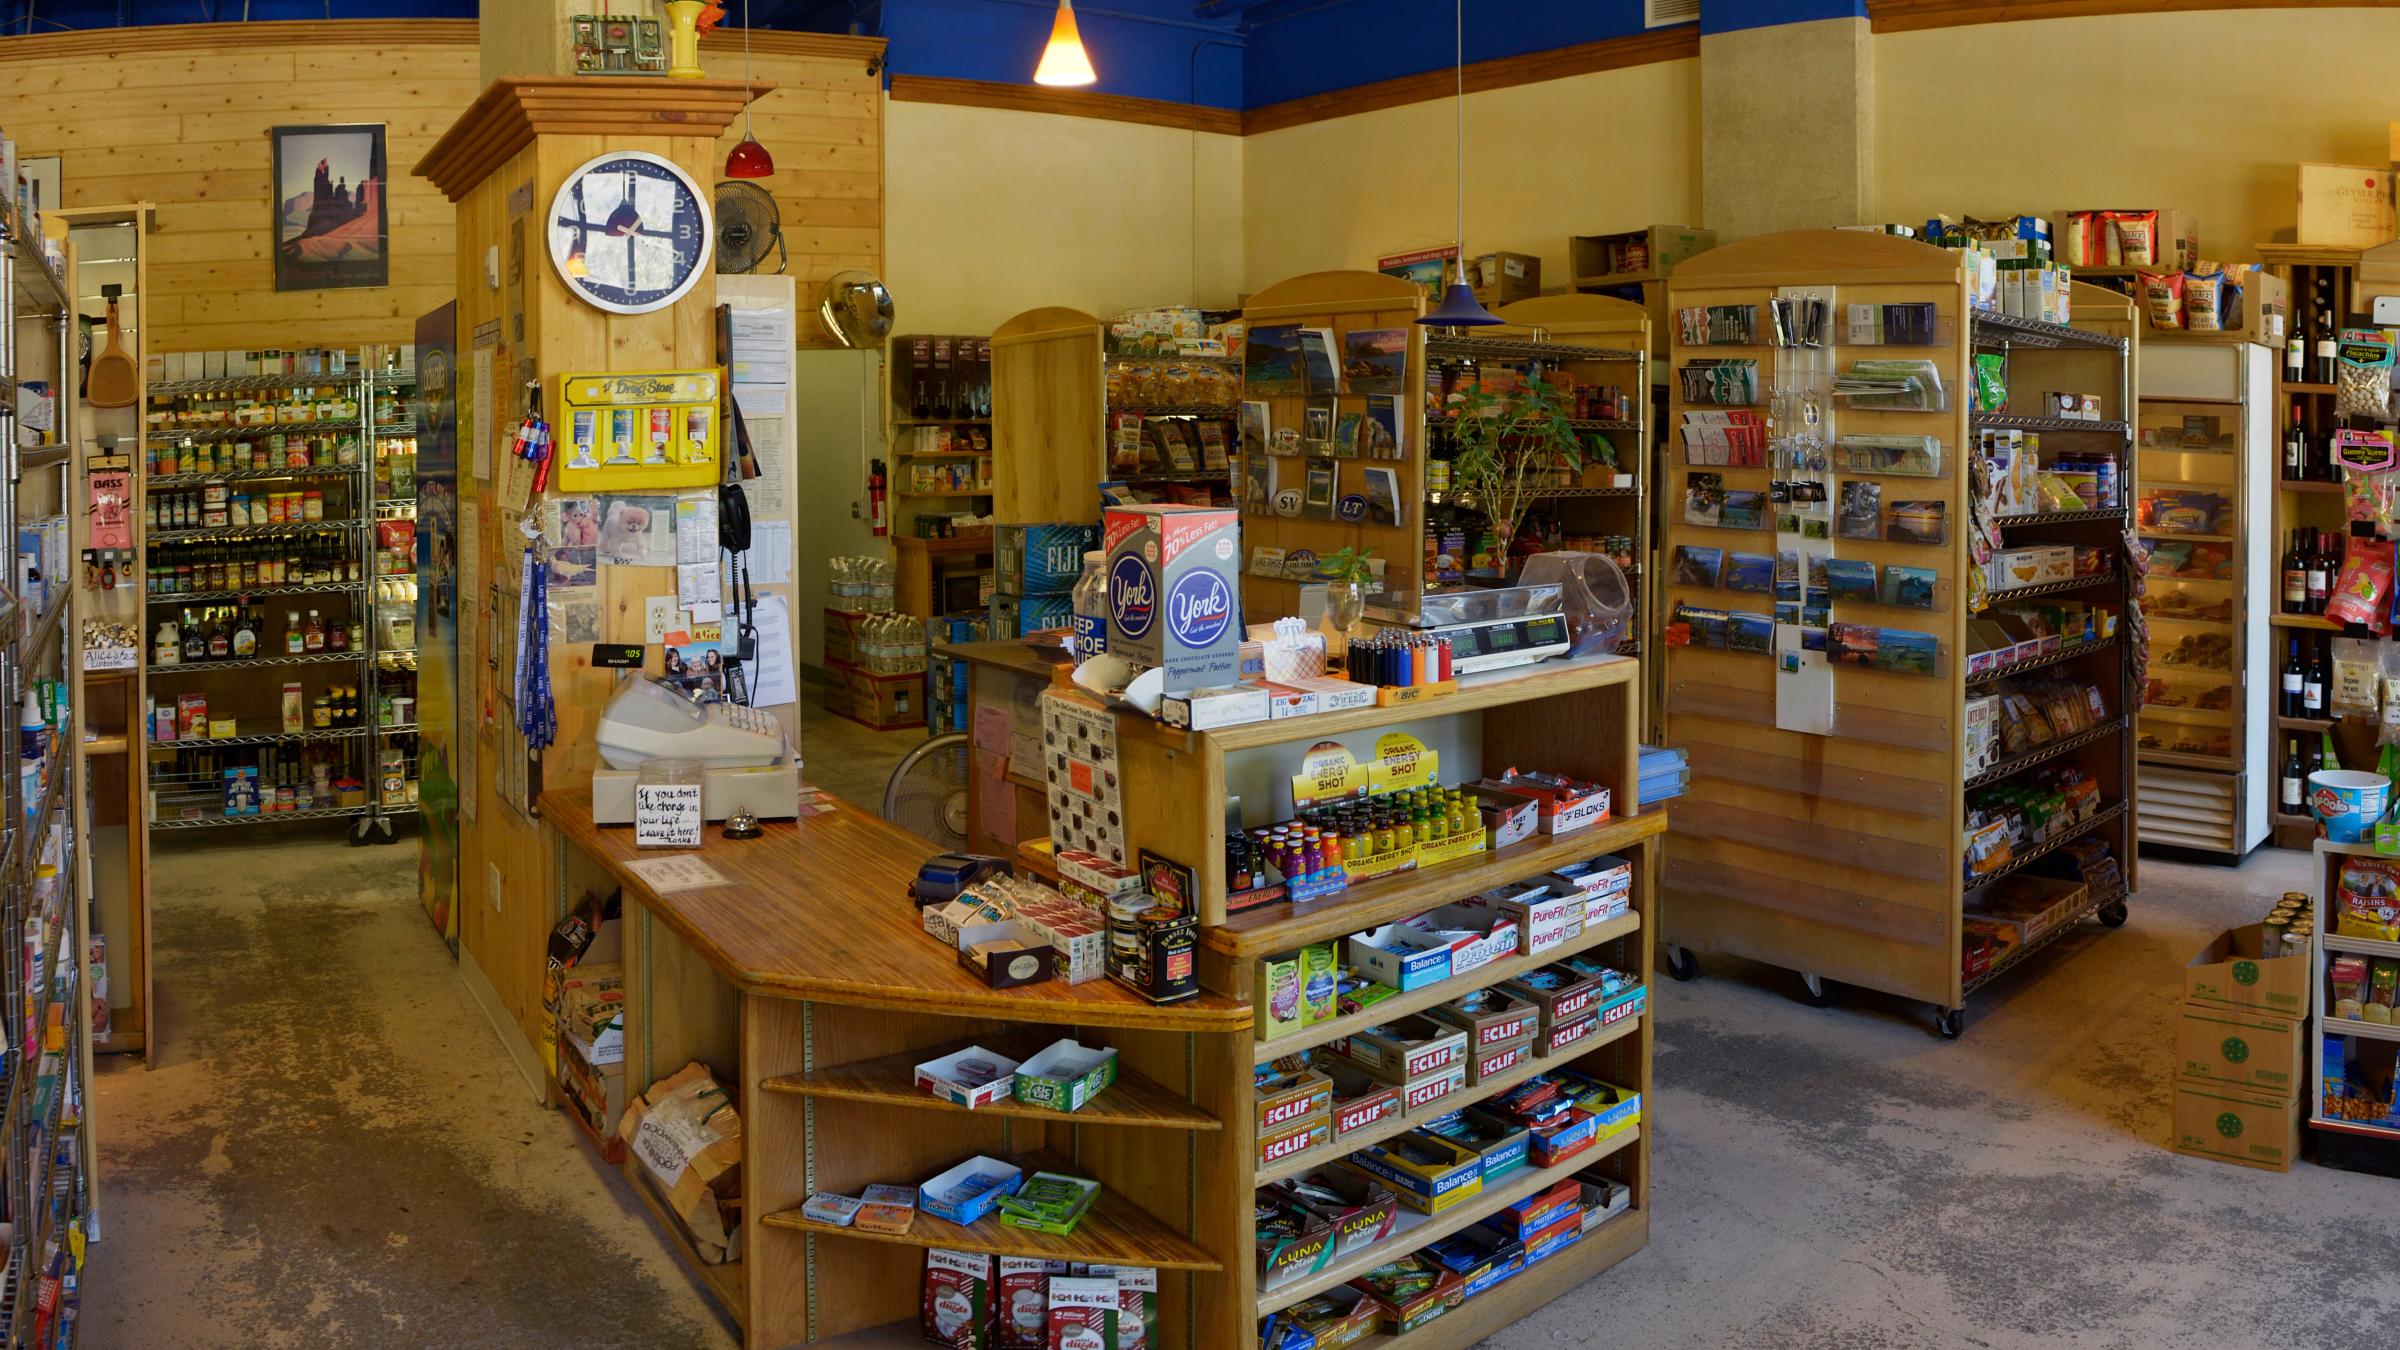 The interior of Alice's Mountain Market, which provides organic food and pharmaceuticals.